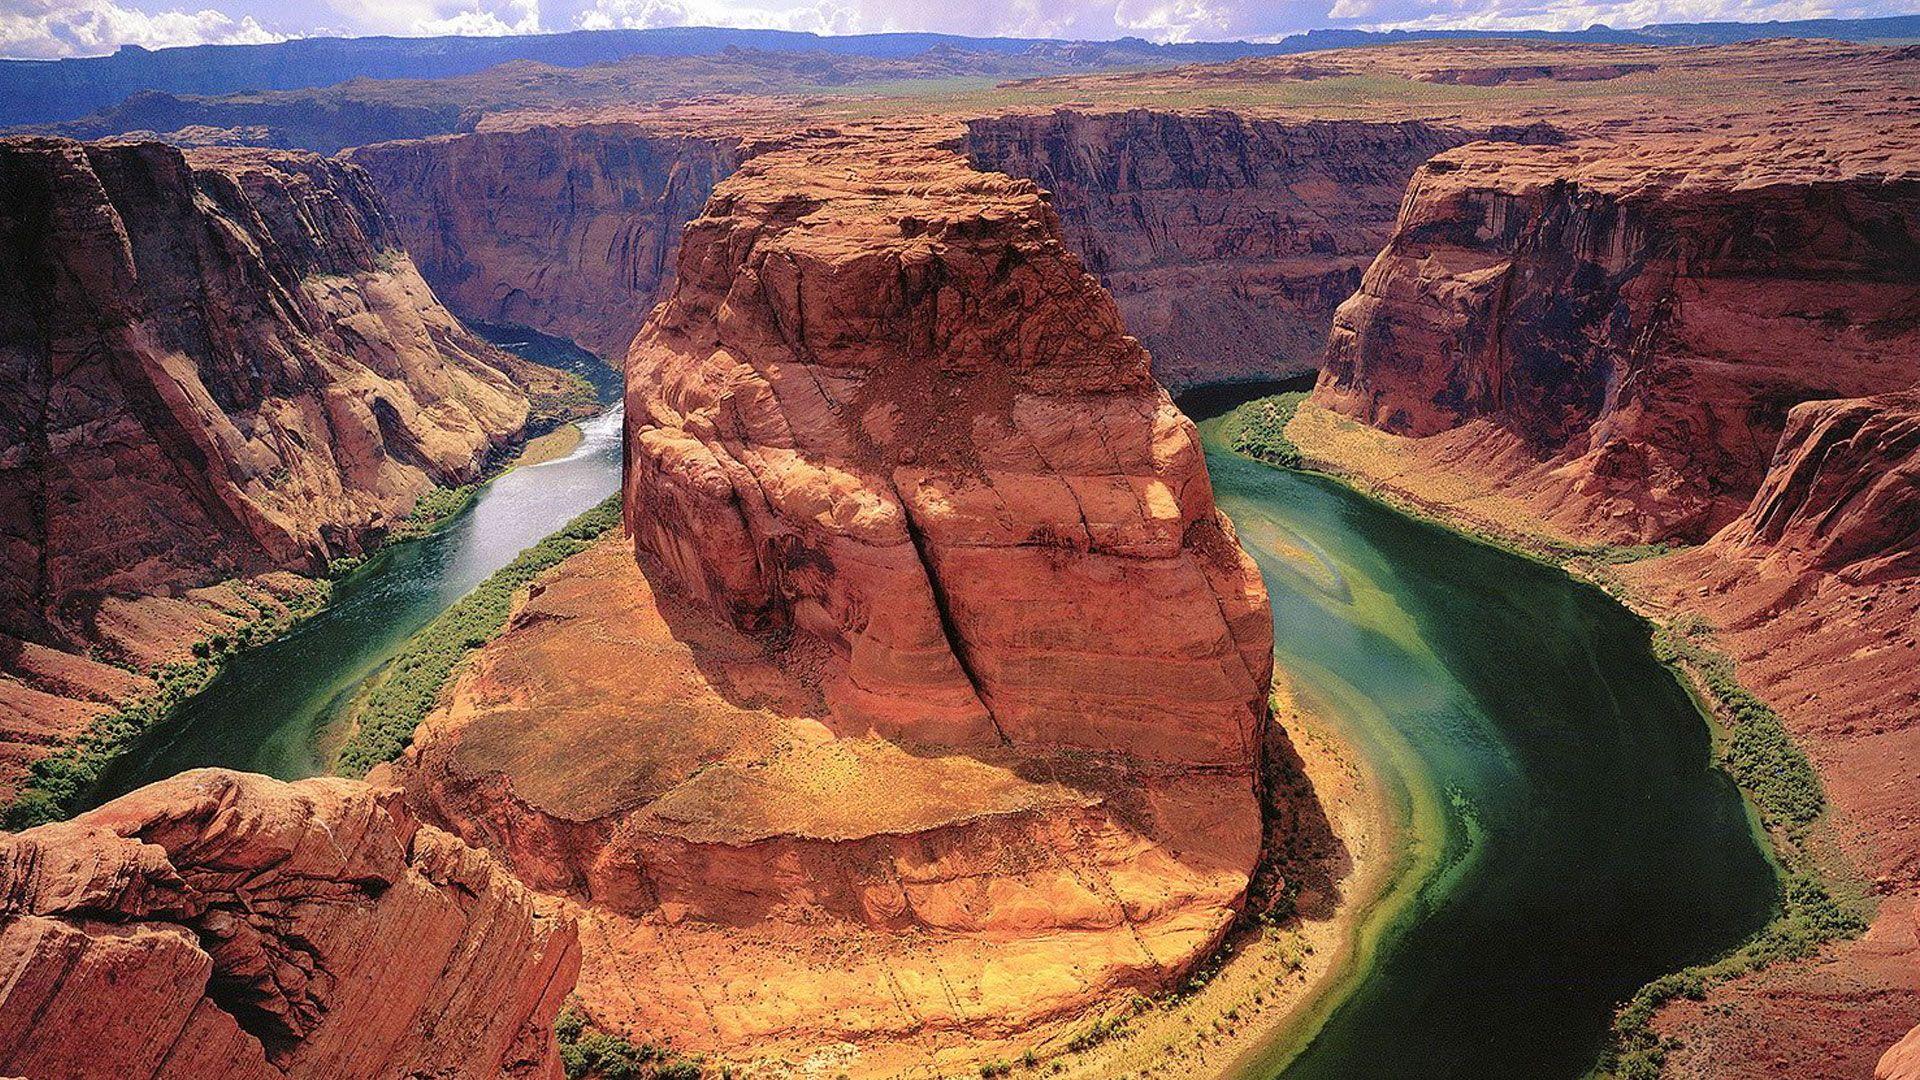 Gallery For > Grand Canyon National Park Wallpaper